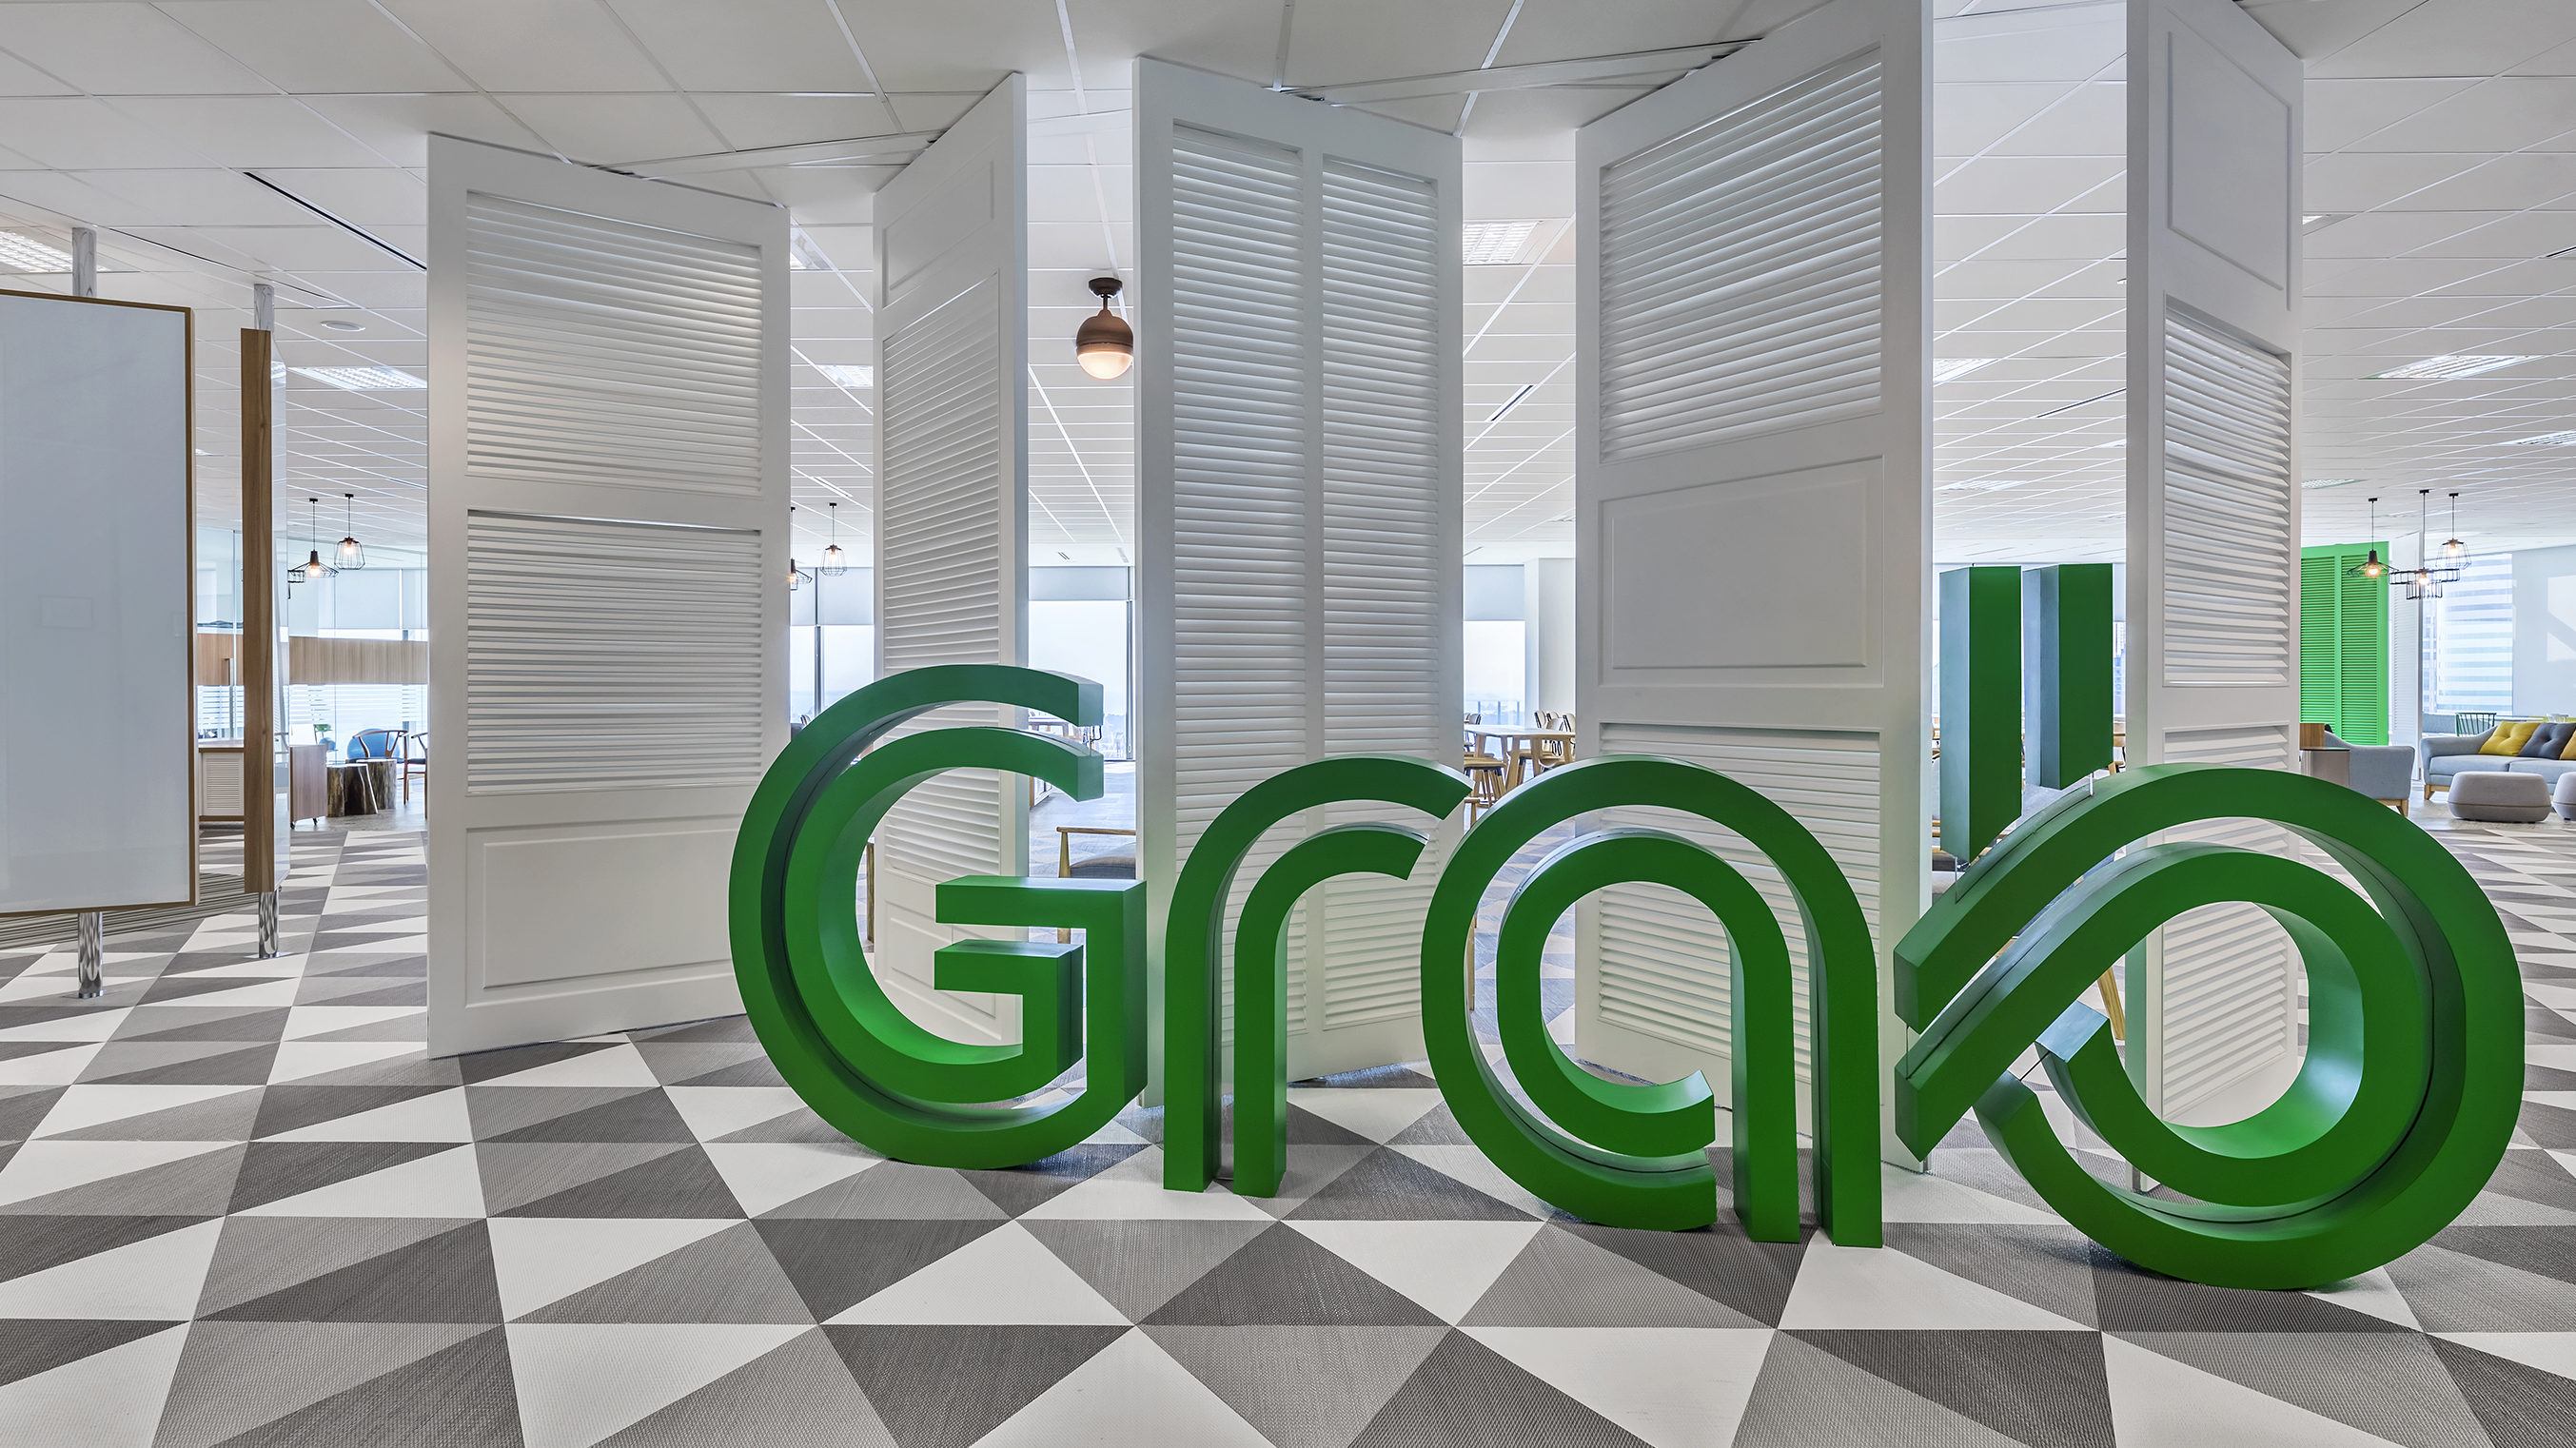 Grab launches new financial services brand